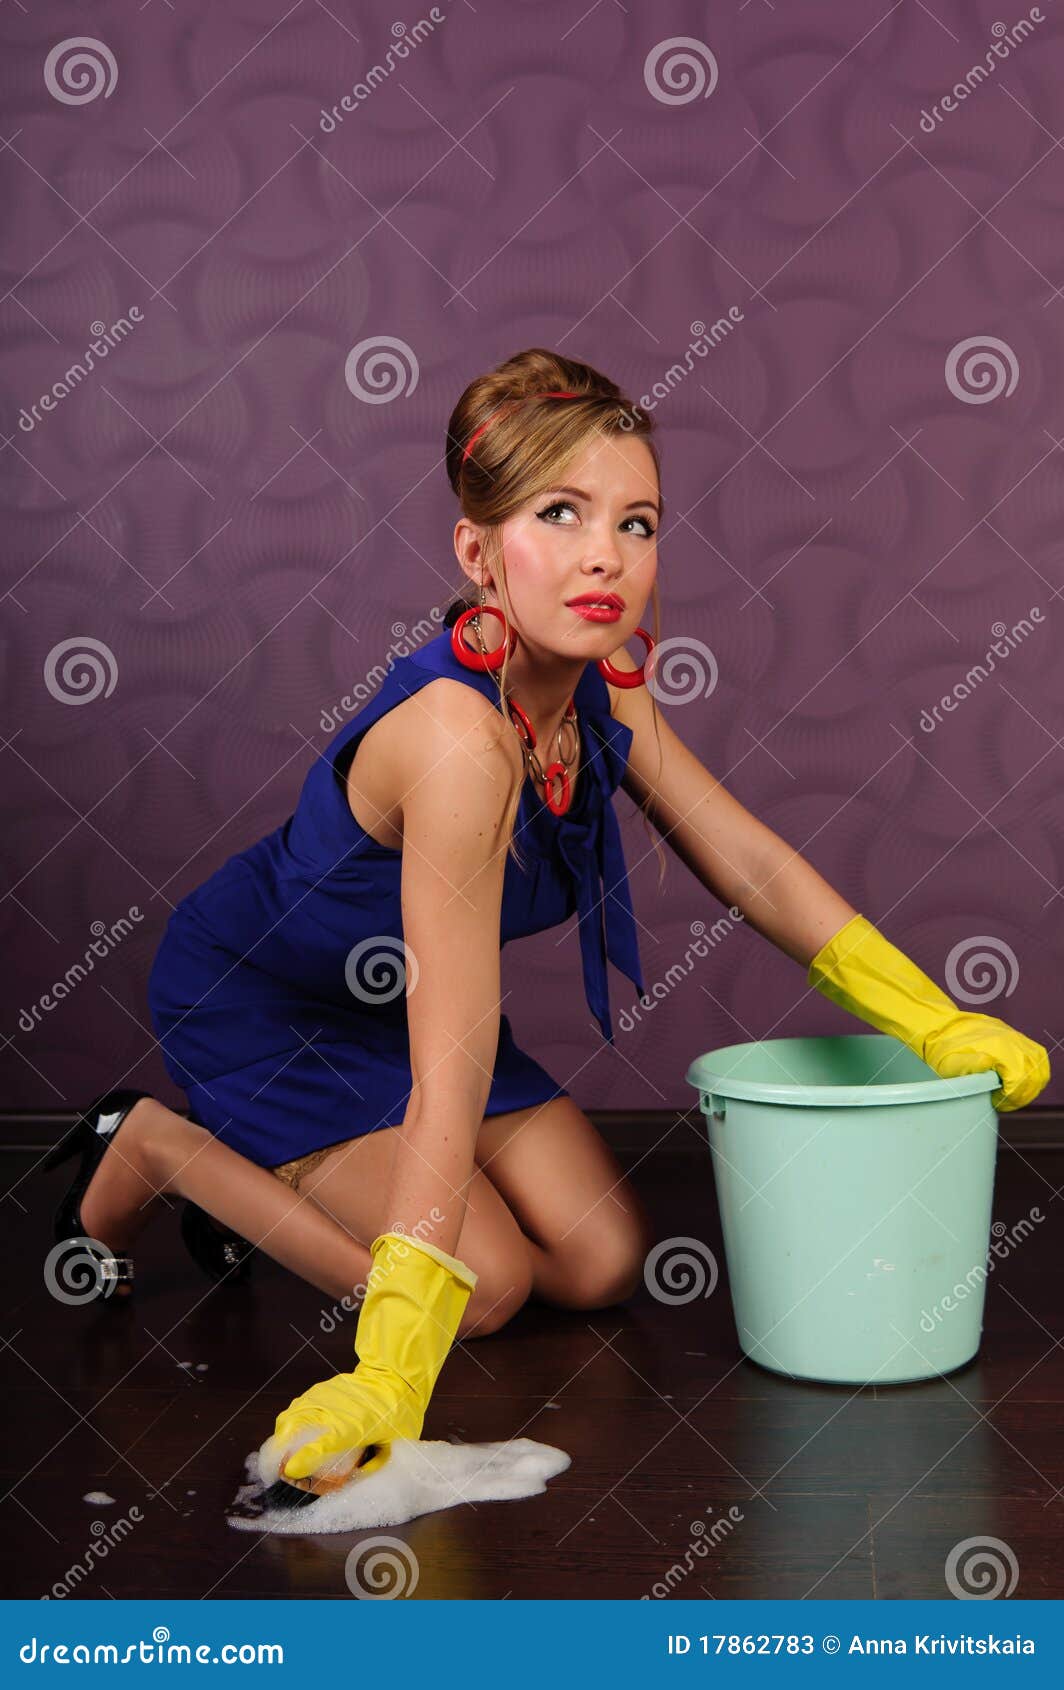 Housewife Is Cleaning The Floor Stock Image - Image of foam, colorful